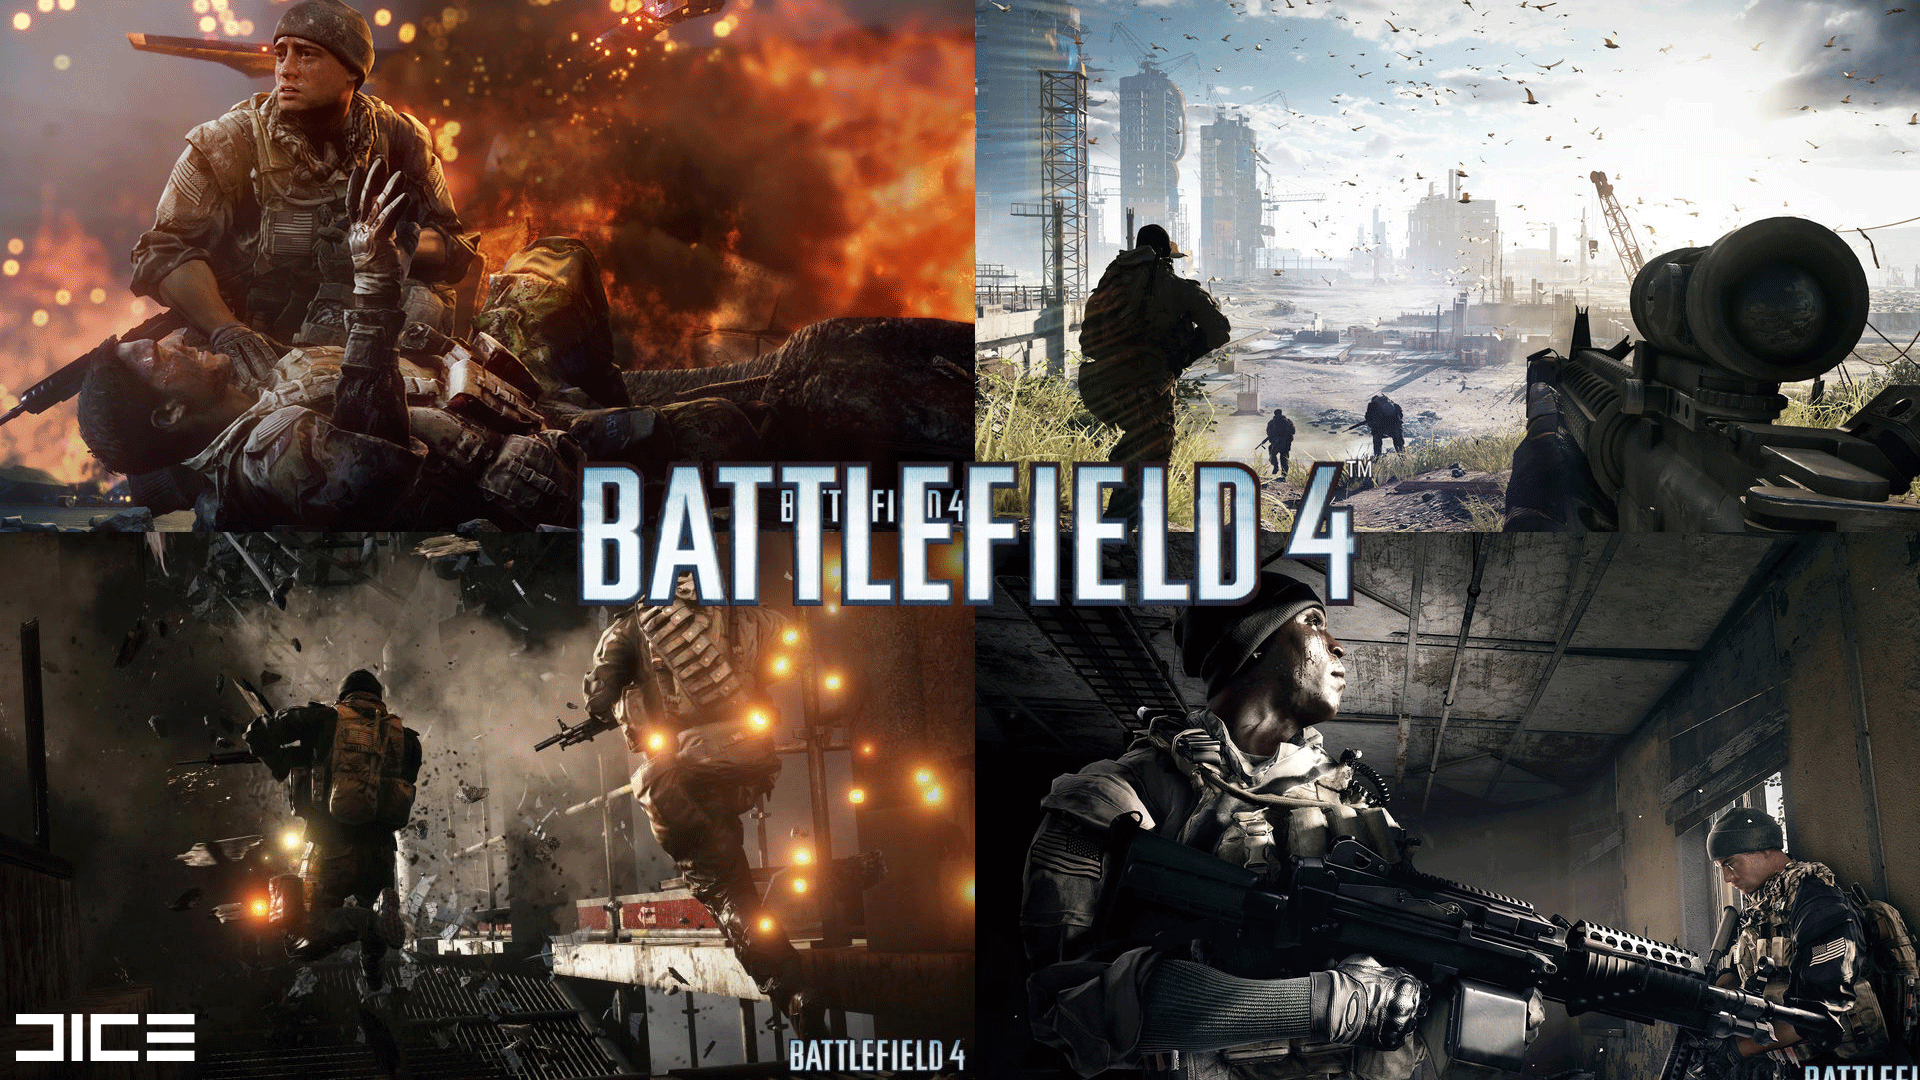 BATTLEFIELD Collage Wallpaper 1080p The GET SOME Academy